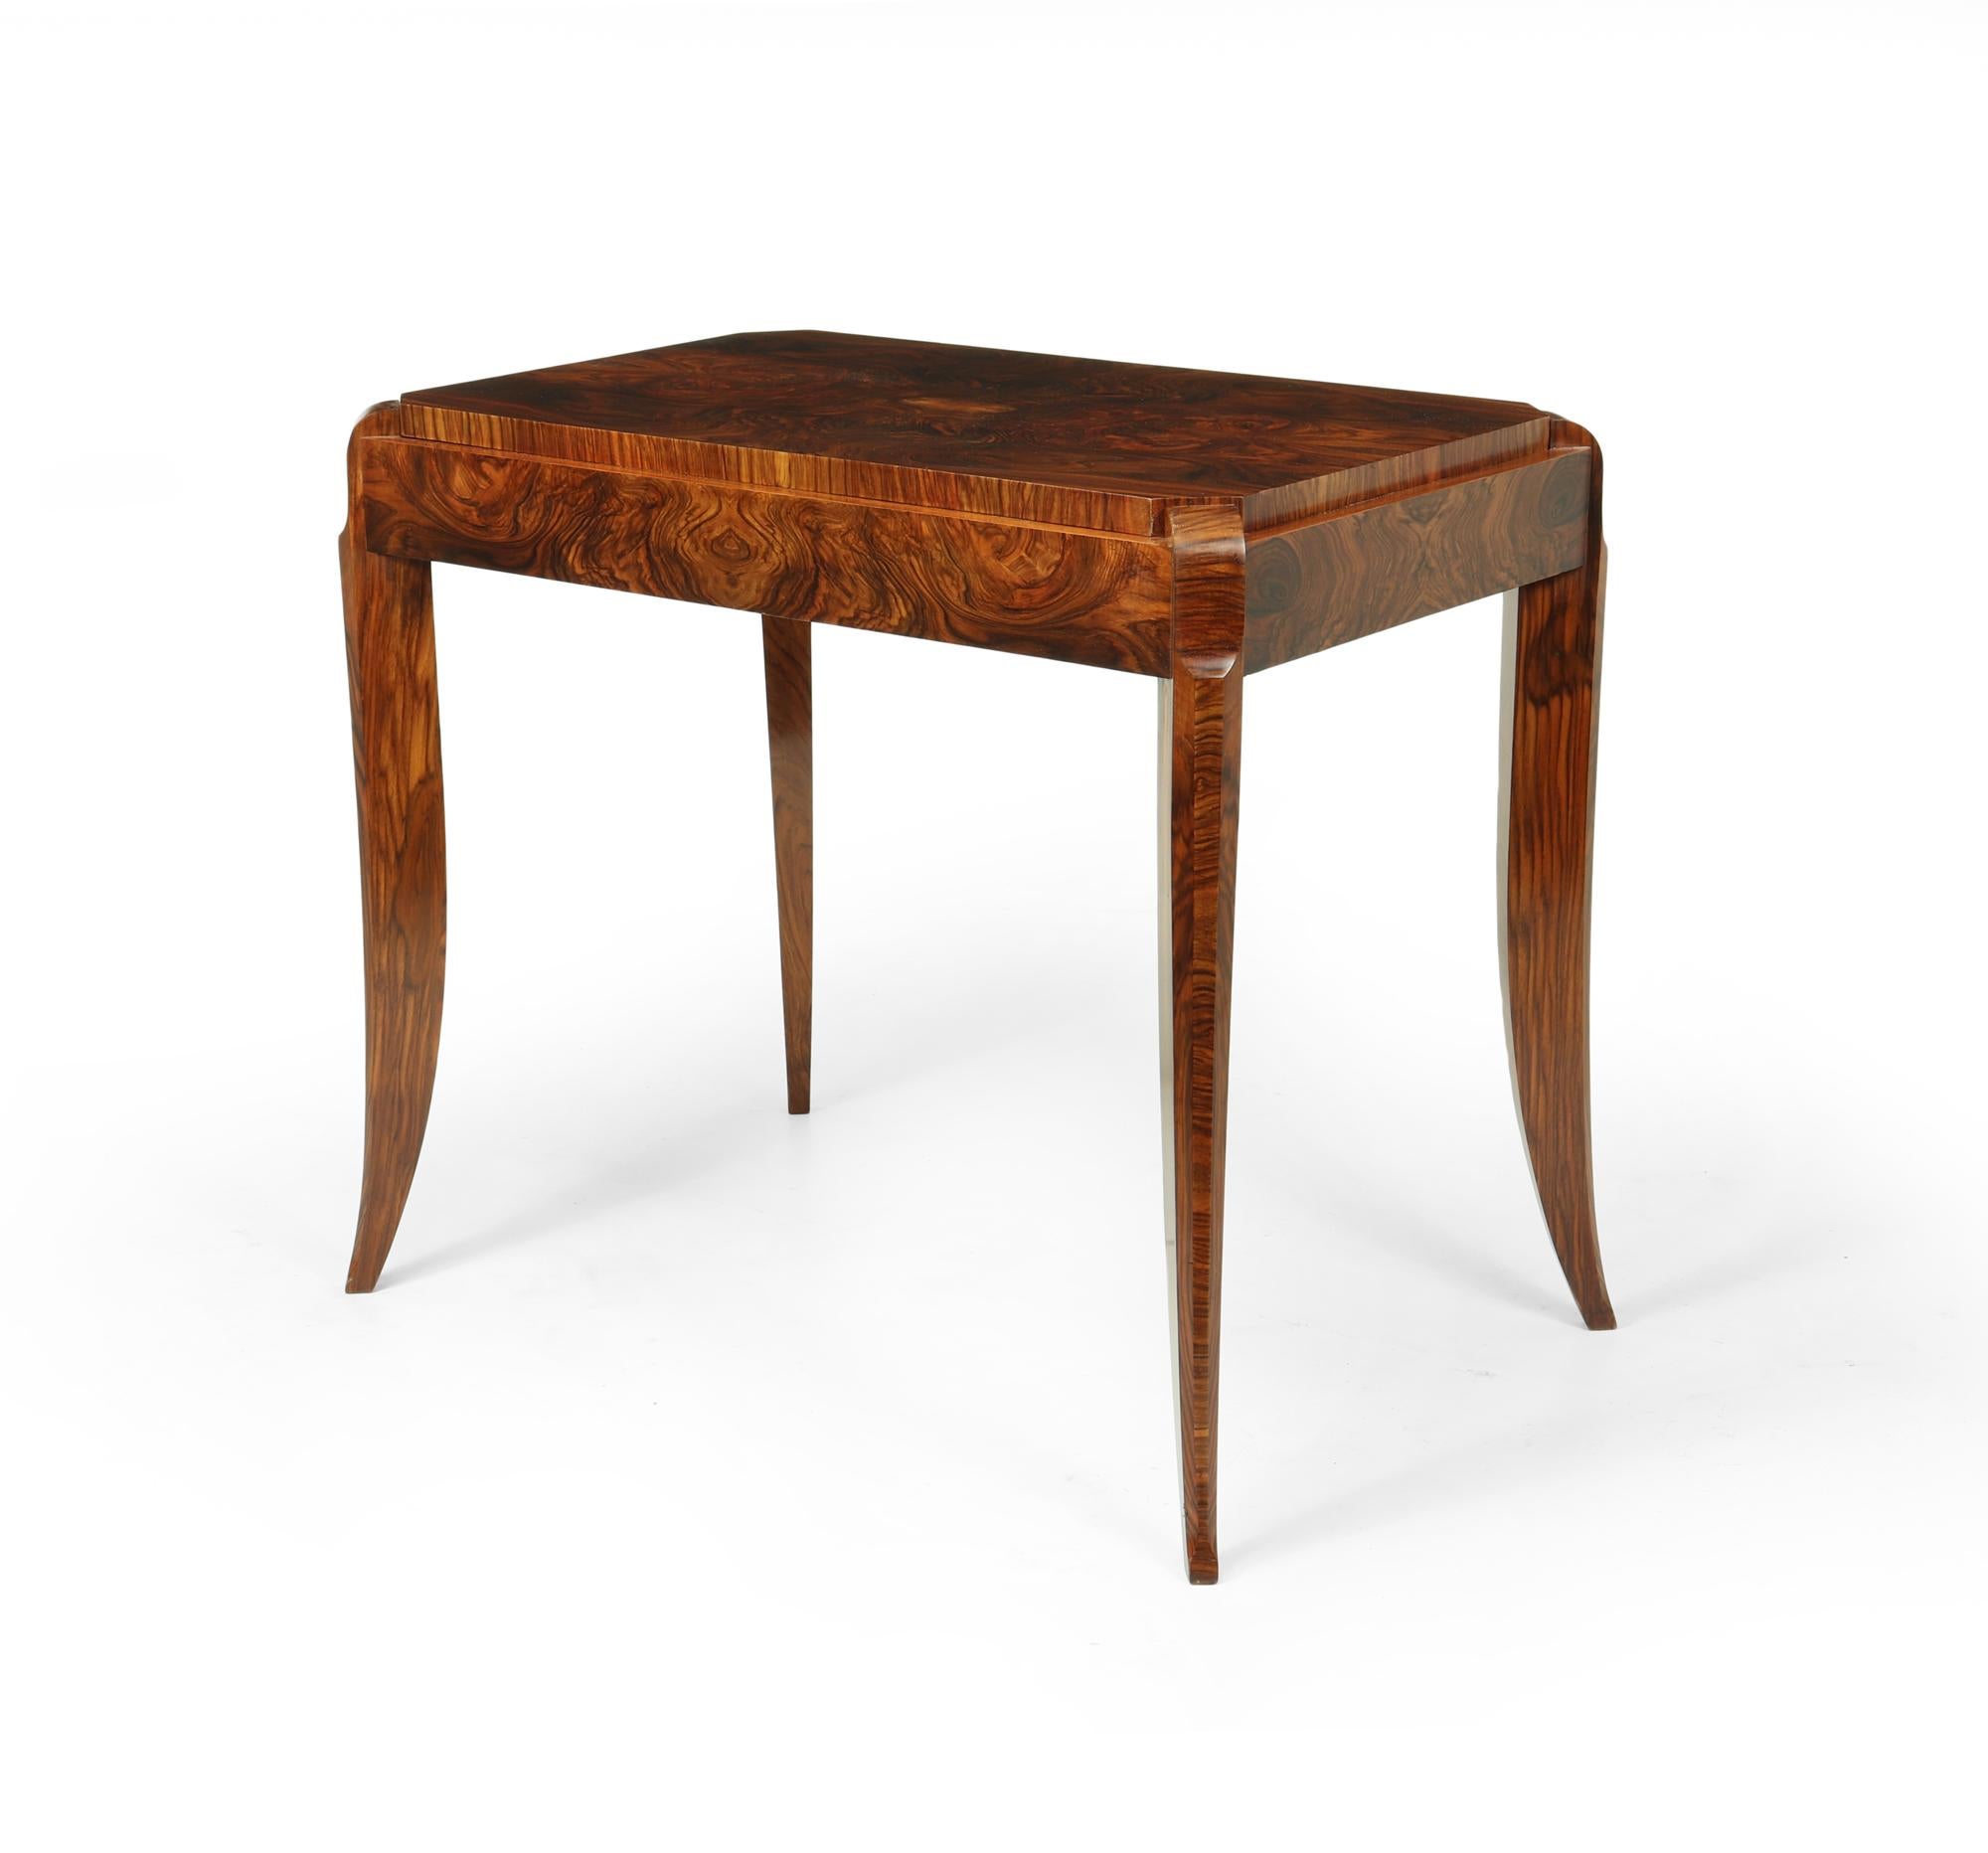 A super French Art Deco Free standing side table or center table in highly figured walnut rectangular top with canted corners standing on sabre legs. The table has been correctly restored and fully polished by hand and is in excellent condition